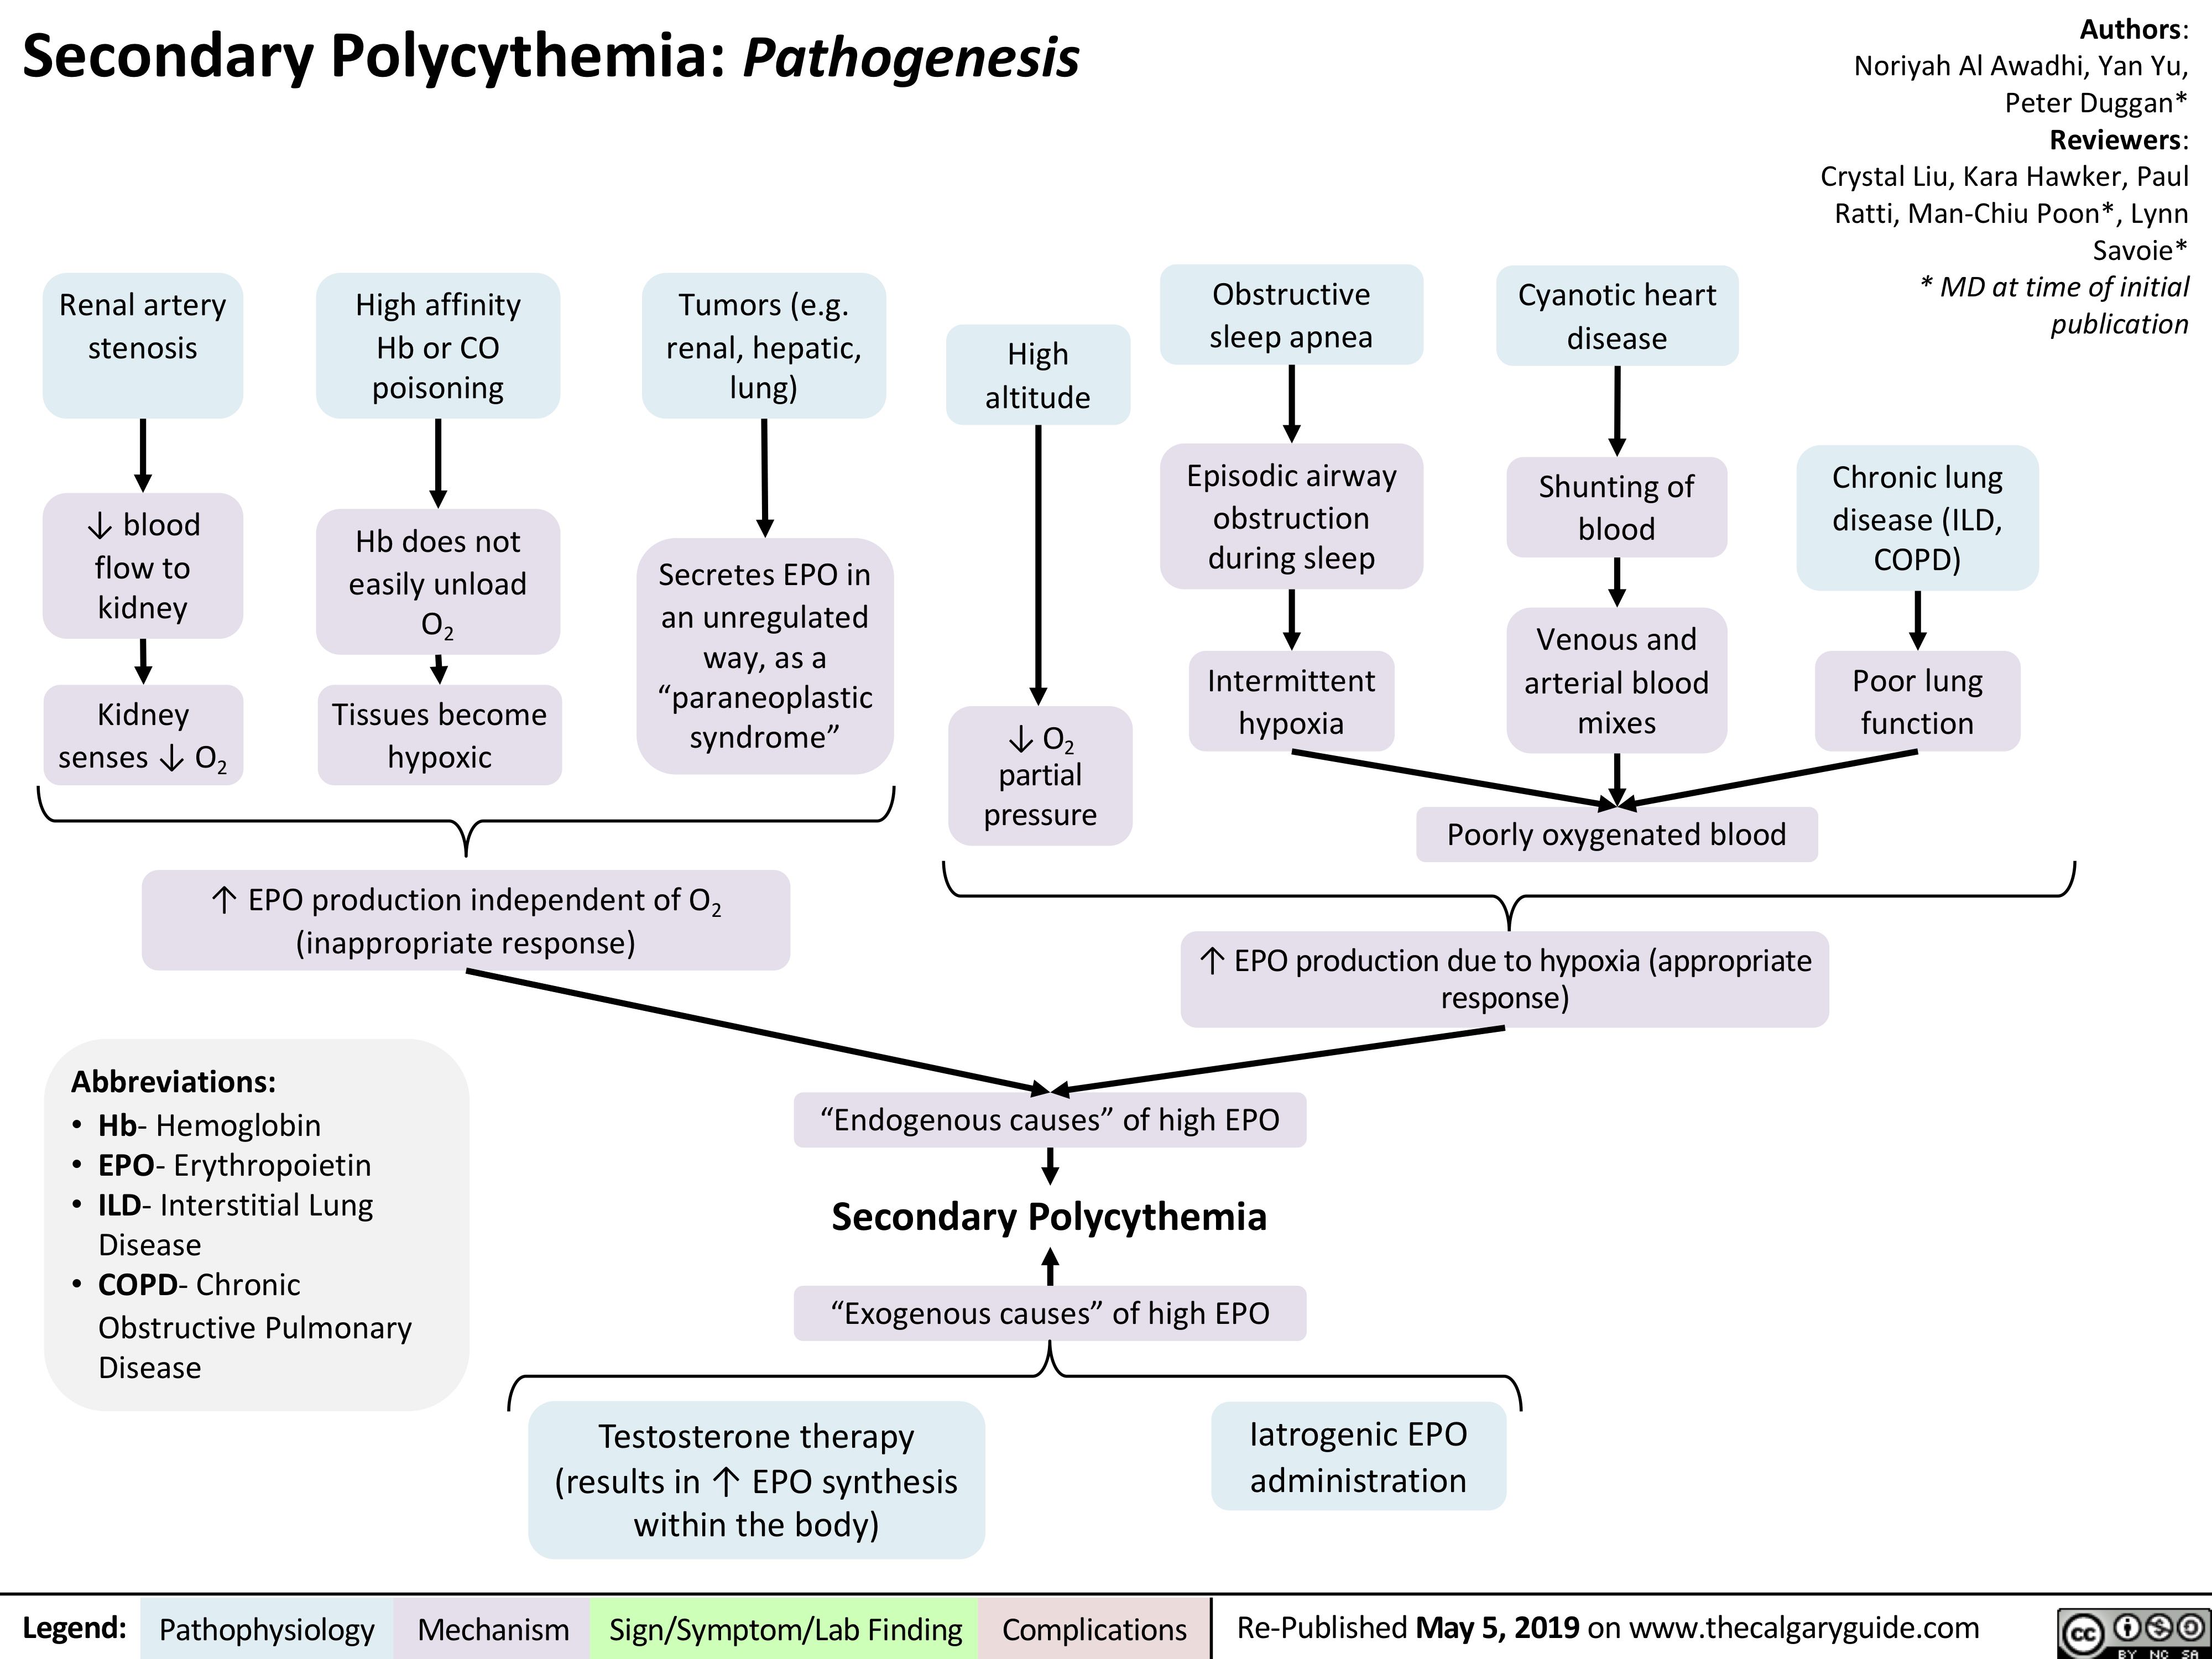 Secondary Polycythemia: Pathogenesis
Authors: Noriyah Al Awadhi, Yan Yu, Peter Duggan* Reviewers: Crystal Liu, Kara Hawker, Paul Ratti, Man-Chiu Poon*, Lynn Savoie* * MD at time of initial publication
Chronic lung disease (ILD, COPD)
Poor lung function
     Renal artery stenosis
↓ blood flow to kidney
Kidney senses ↓ O2
High affinity Hb or CO poisoning
Hb does not easily unload O2
Tissues become hypoxic
Tumors (e.g. renal, hepatic, lung)
Secretes EPO in an unregulated way, as a “paraneoplastic syndrome”
High altitude
Obstructive sleep apnea
Episodic airway obstruction during sleep
Intermittent hypoxia
Cyanotic heart disease
Shunting of blood
Venous and arterial blood mixes
Poorly oxygenated blood
                        ↓ O2 partial pressure
     ↑ EPO production independent of O2 (inappropriate response)
↑ EPO production due to hypoxia (appropriate response)
    Abbreviations:
• Hb- Hemoglobin
• EPO- Erythropoietin • ILD- Interstitial Lung
Disease
• COPD- Chronic
Obstructive Pulmonary Disease
“Endogenous causes” of high EPO
Secondary Polycythemia
“Exogenous causes” of high EPO
Testosterone therapy Iatrogenic EPO (results in ↑ EPO synthesis administration
       within the body)
 Legend:
 Pathophysiology
 Mechanism
Sign/Symptom/Lab Finding
  Complications
Re-Published May 5, 2019 on www.thecalgaryguide.com
   